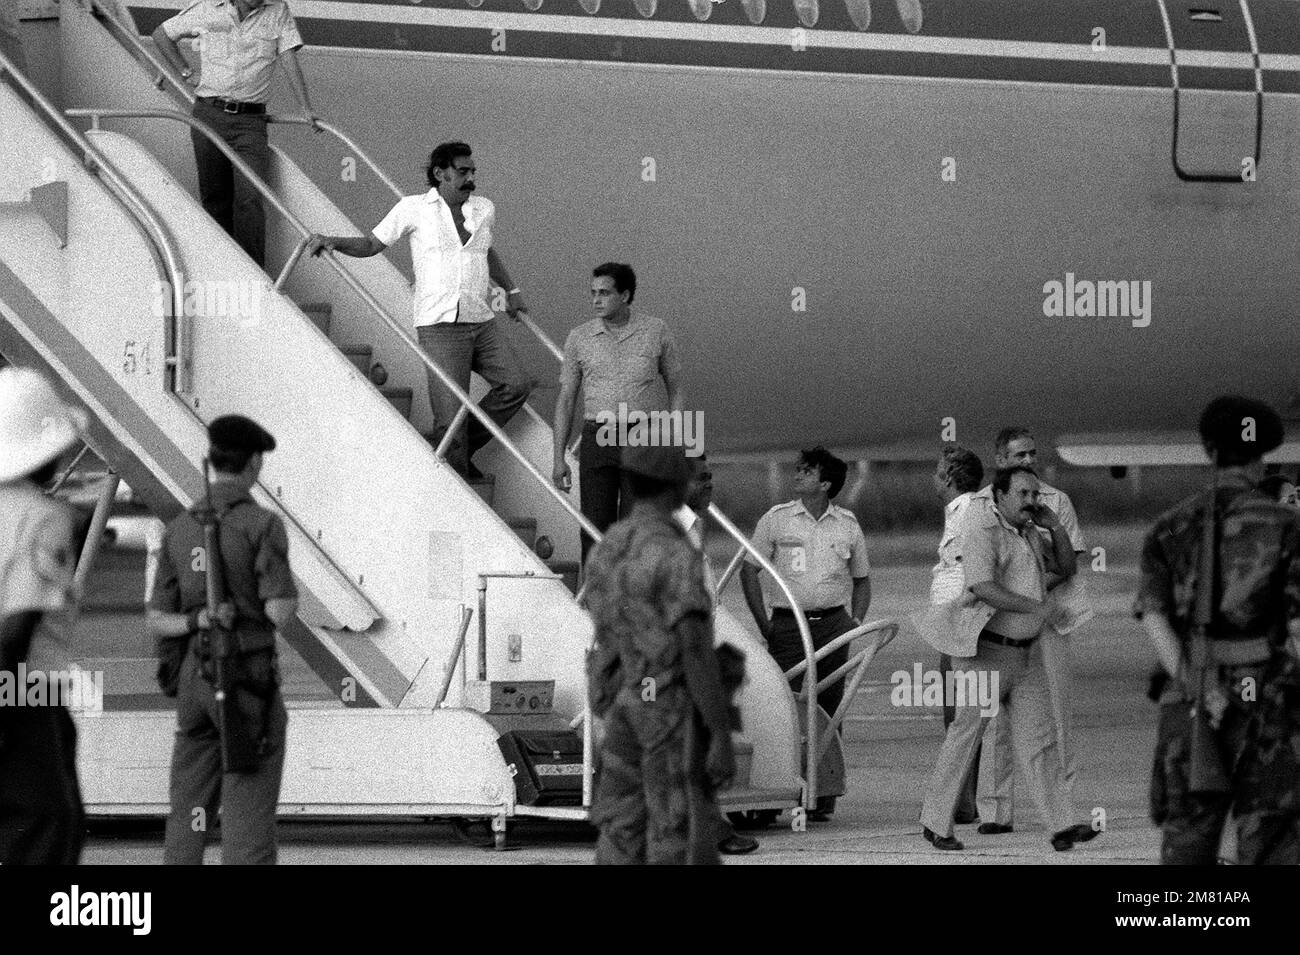 U.S. Air Force security police stand guard over Cuban nationals on the boarding ramp of the Cuban I1-62M airliner that will return them to Cuba. They were captured on Grenada during the multiservice, multinational Operation Urgent Fury. He is being transferred from the C-130 Hercules aircraft to a Cuban airliner that will return him to Cuba. Subject Operation/Series: URGENT FURY Base: Seawell International Airport Country: Bangladesh (BGD) Stock Photo